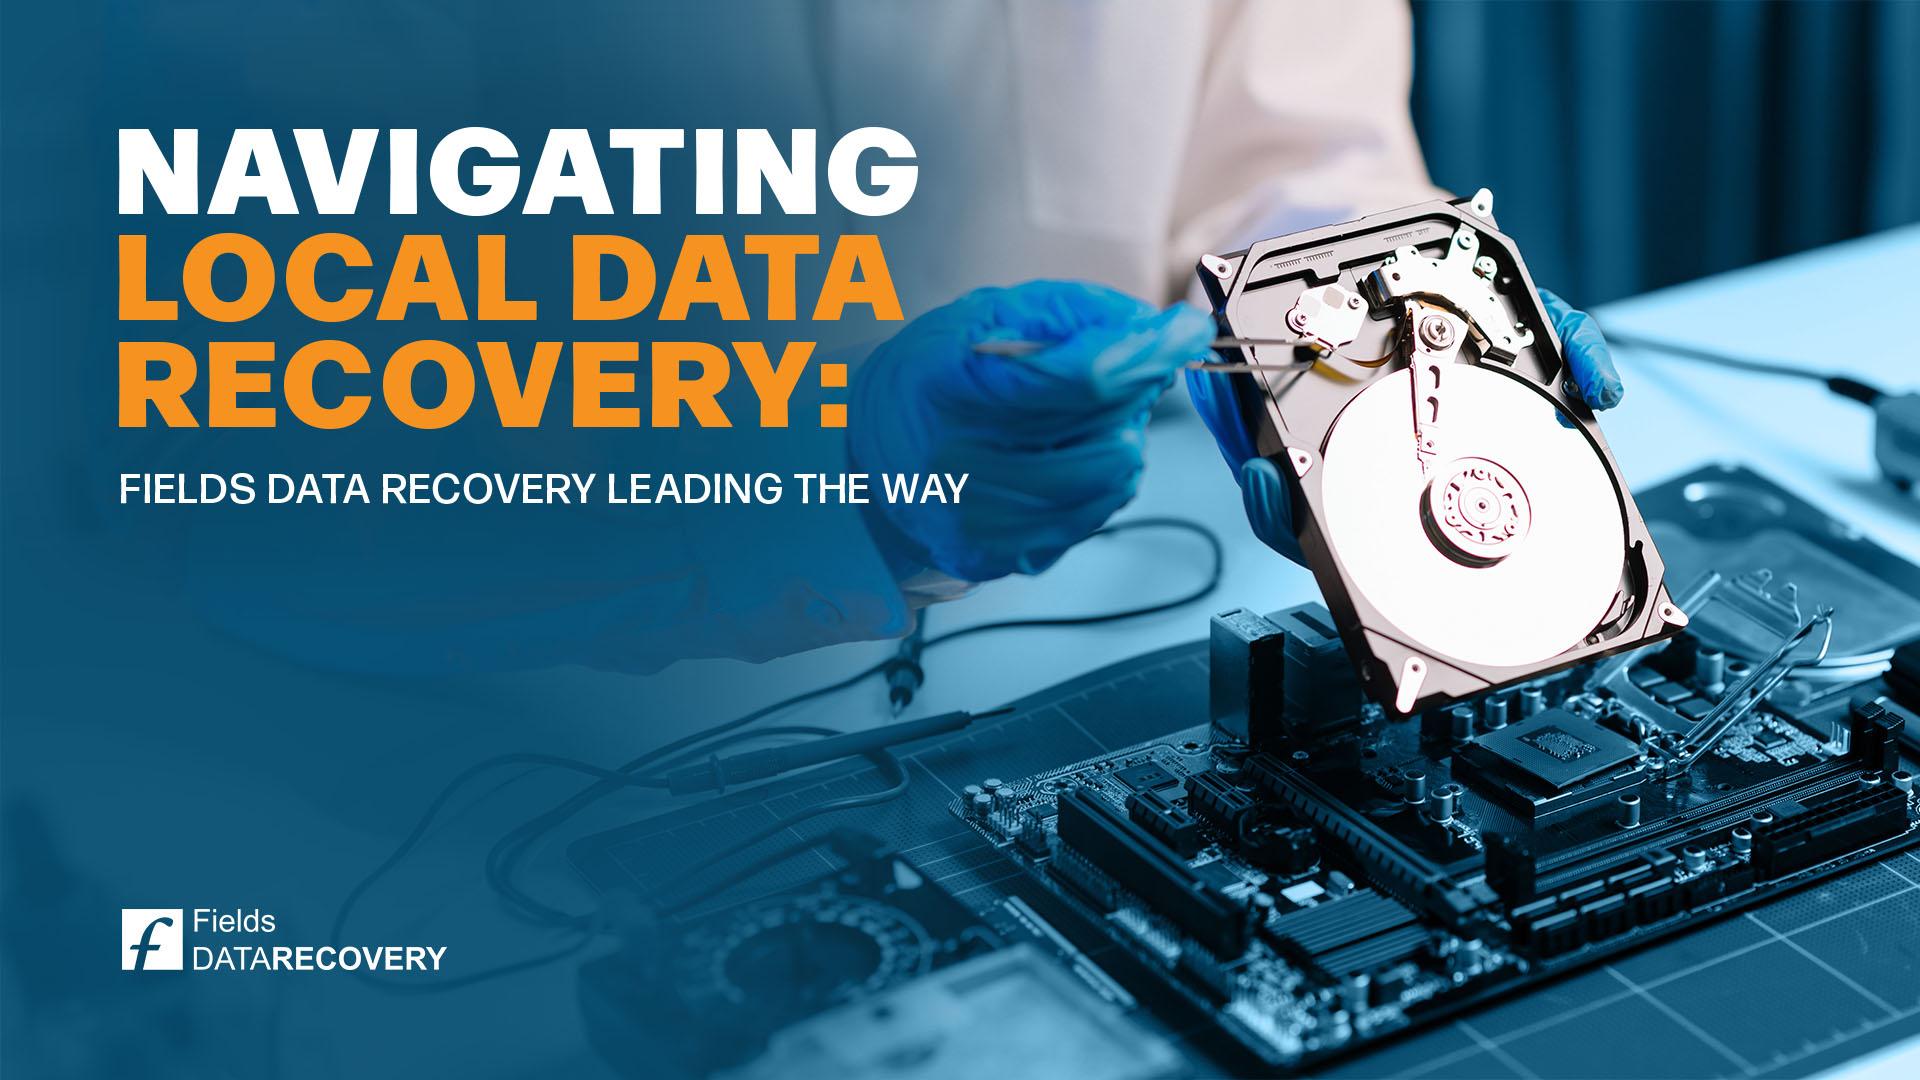 Navigating Local Data Recovery: Fields Data Recovery Leading the Way